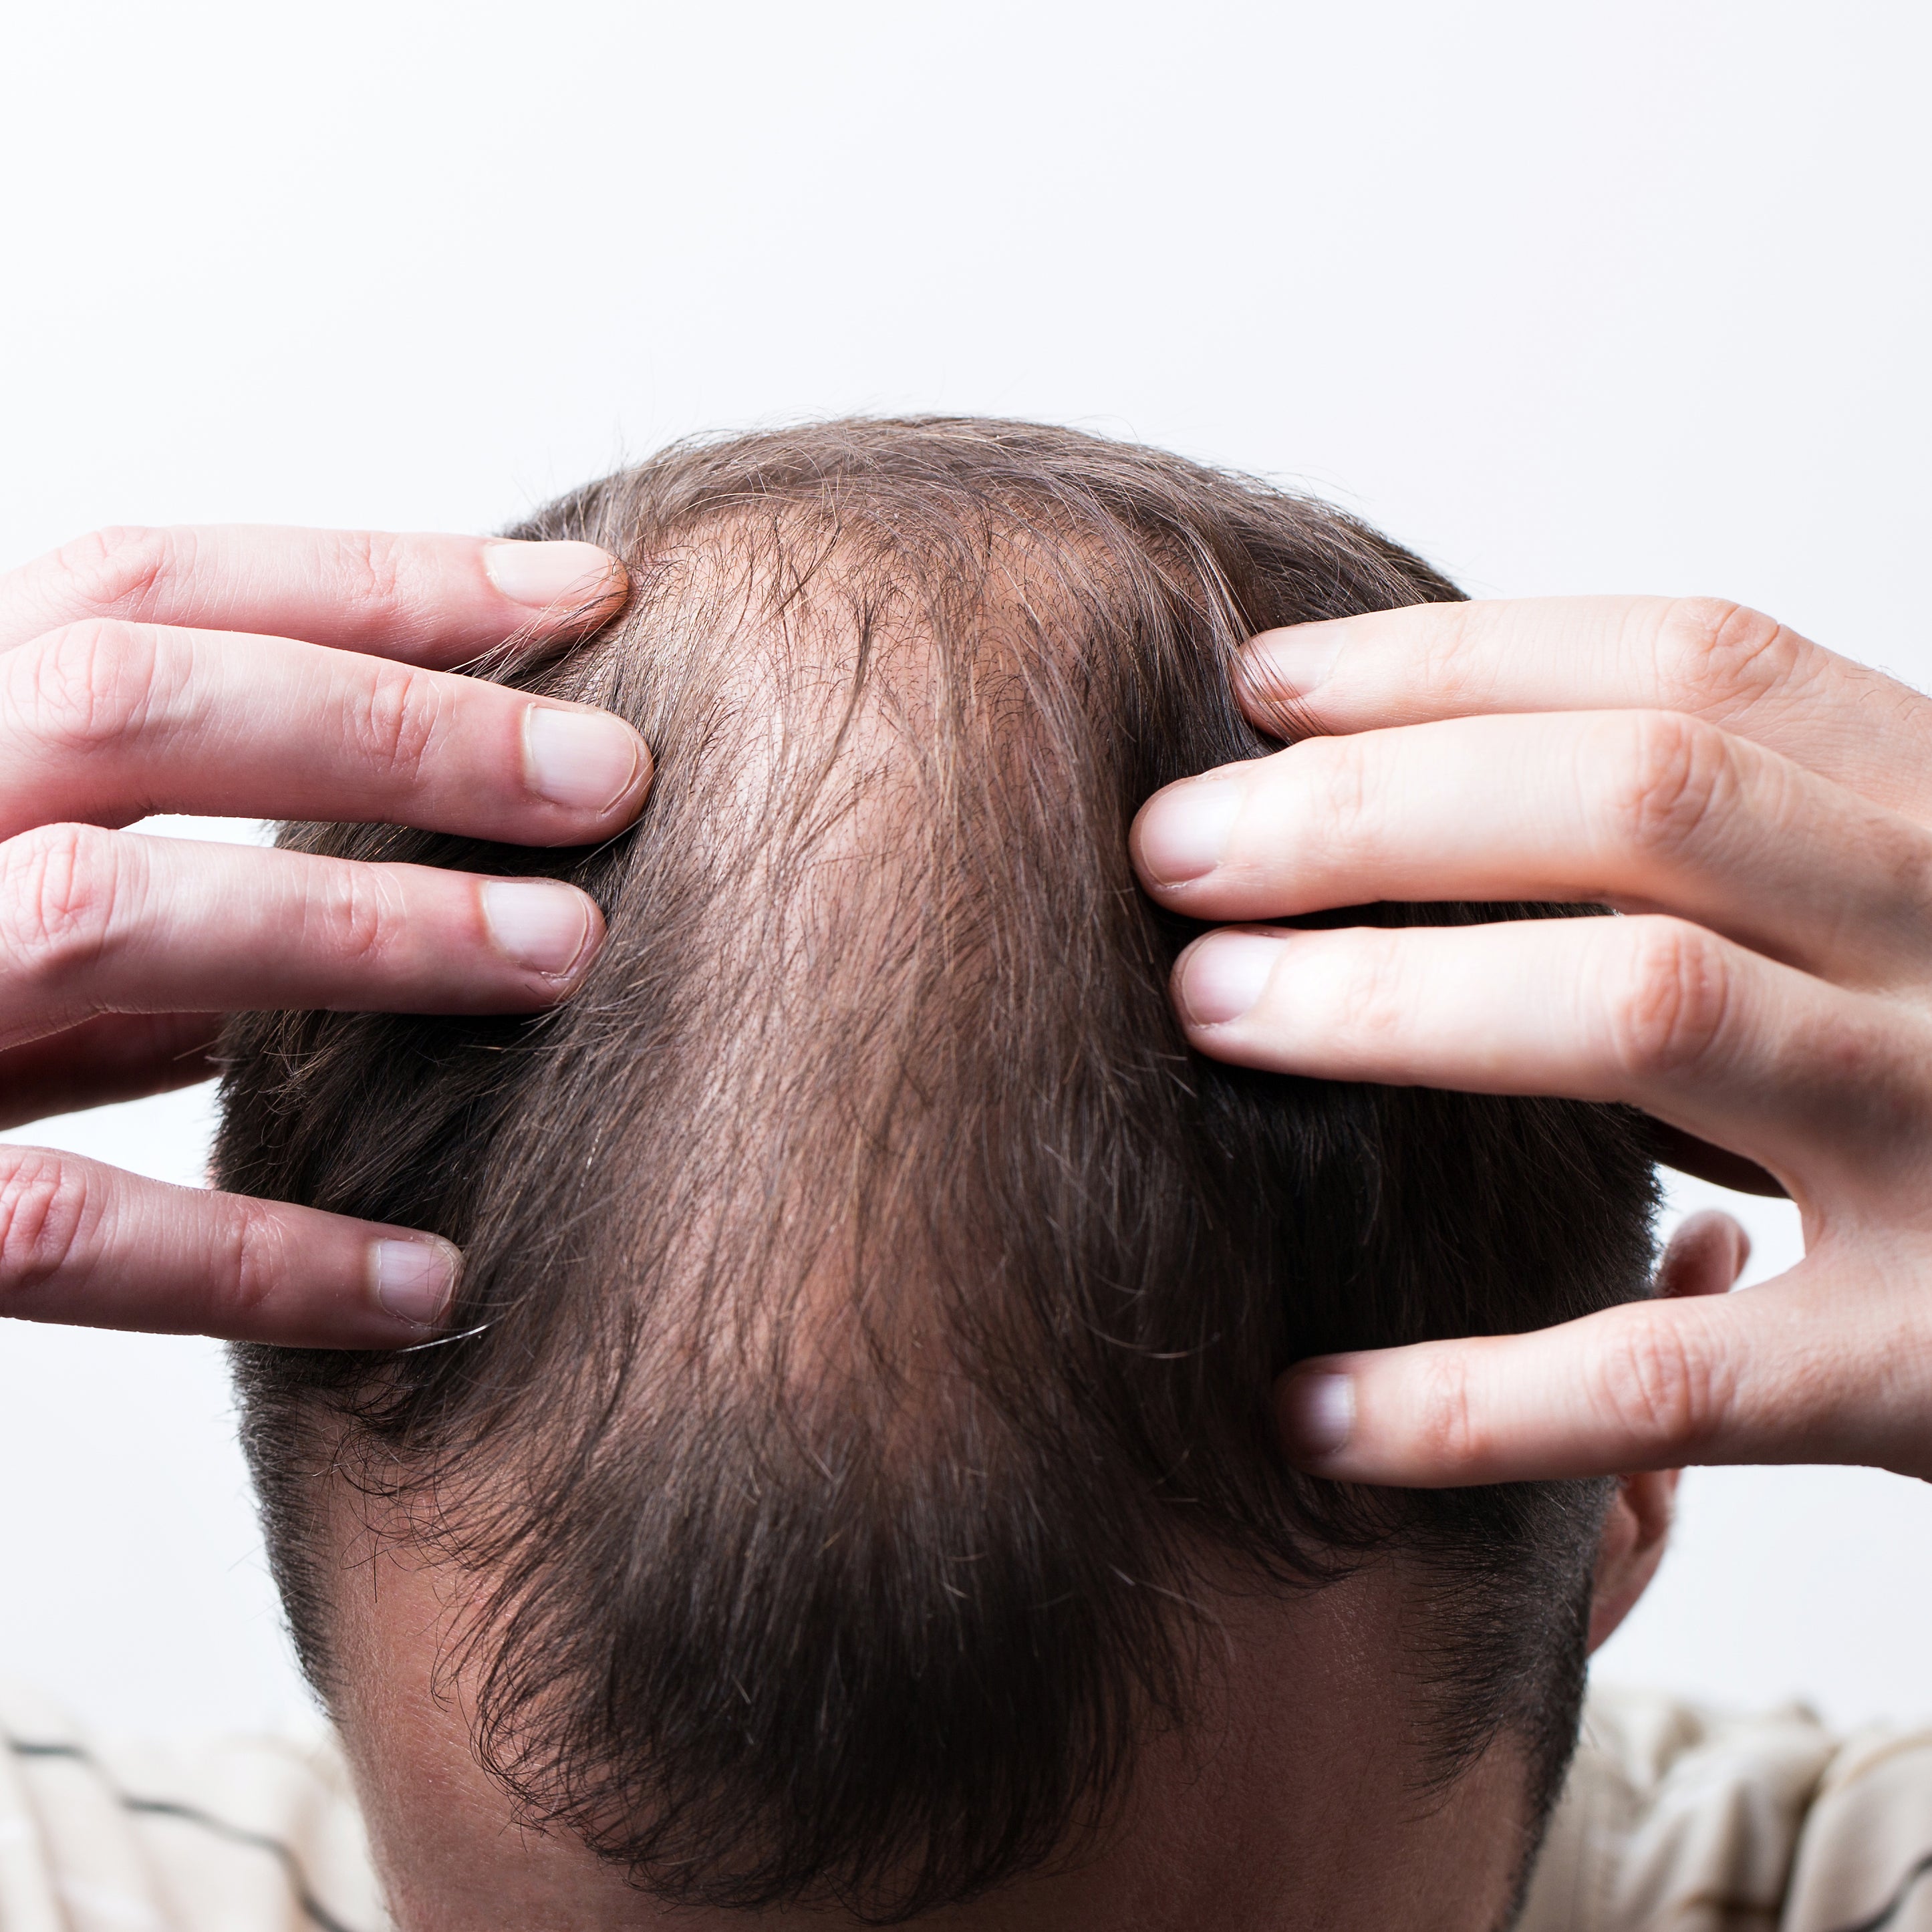 Is It True Nothing Can Be Done About Male Pattern Baldness